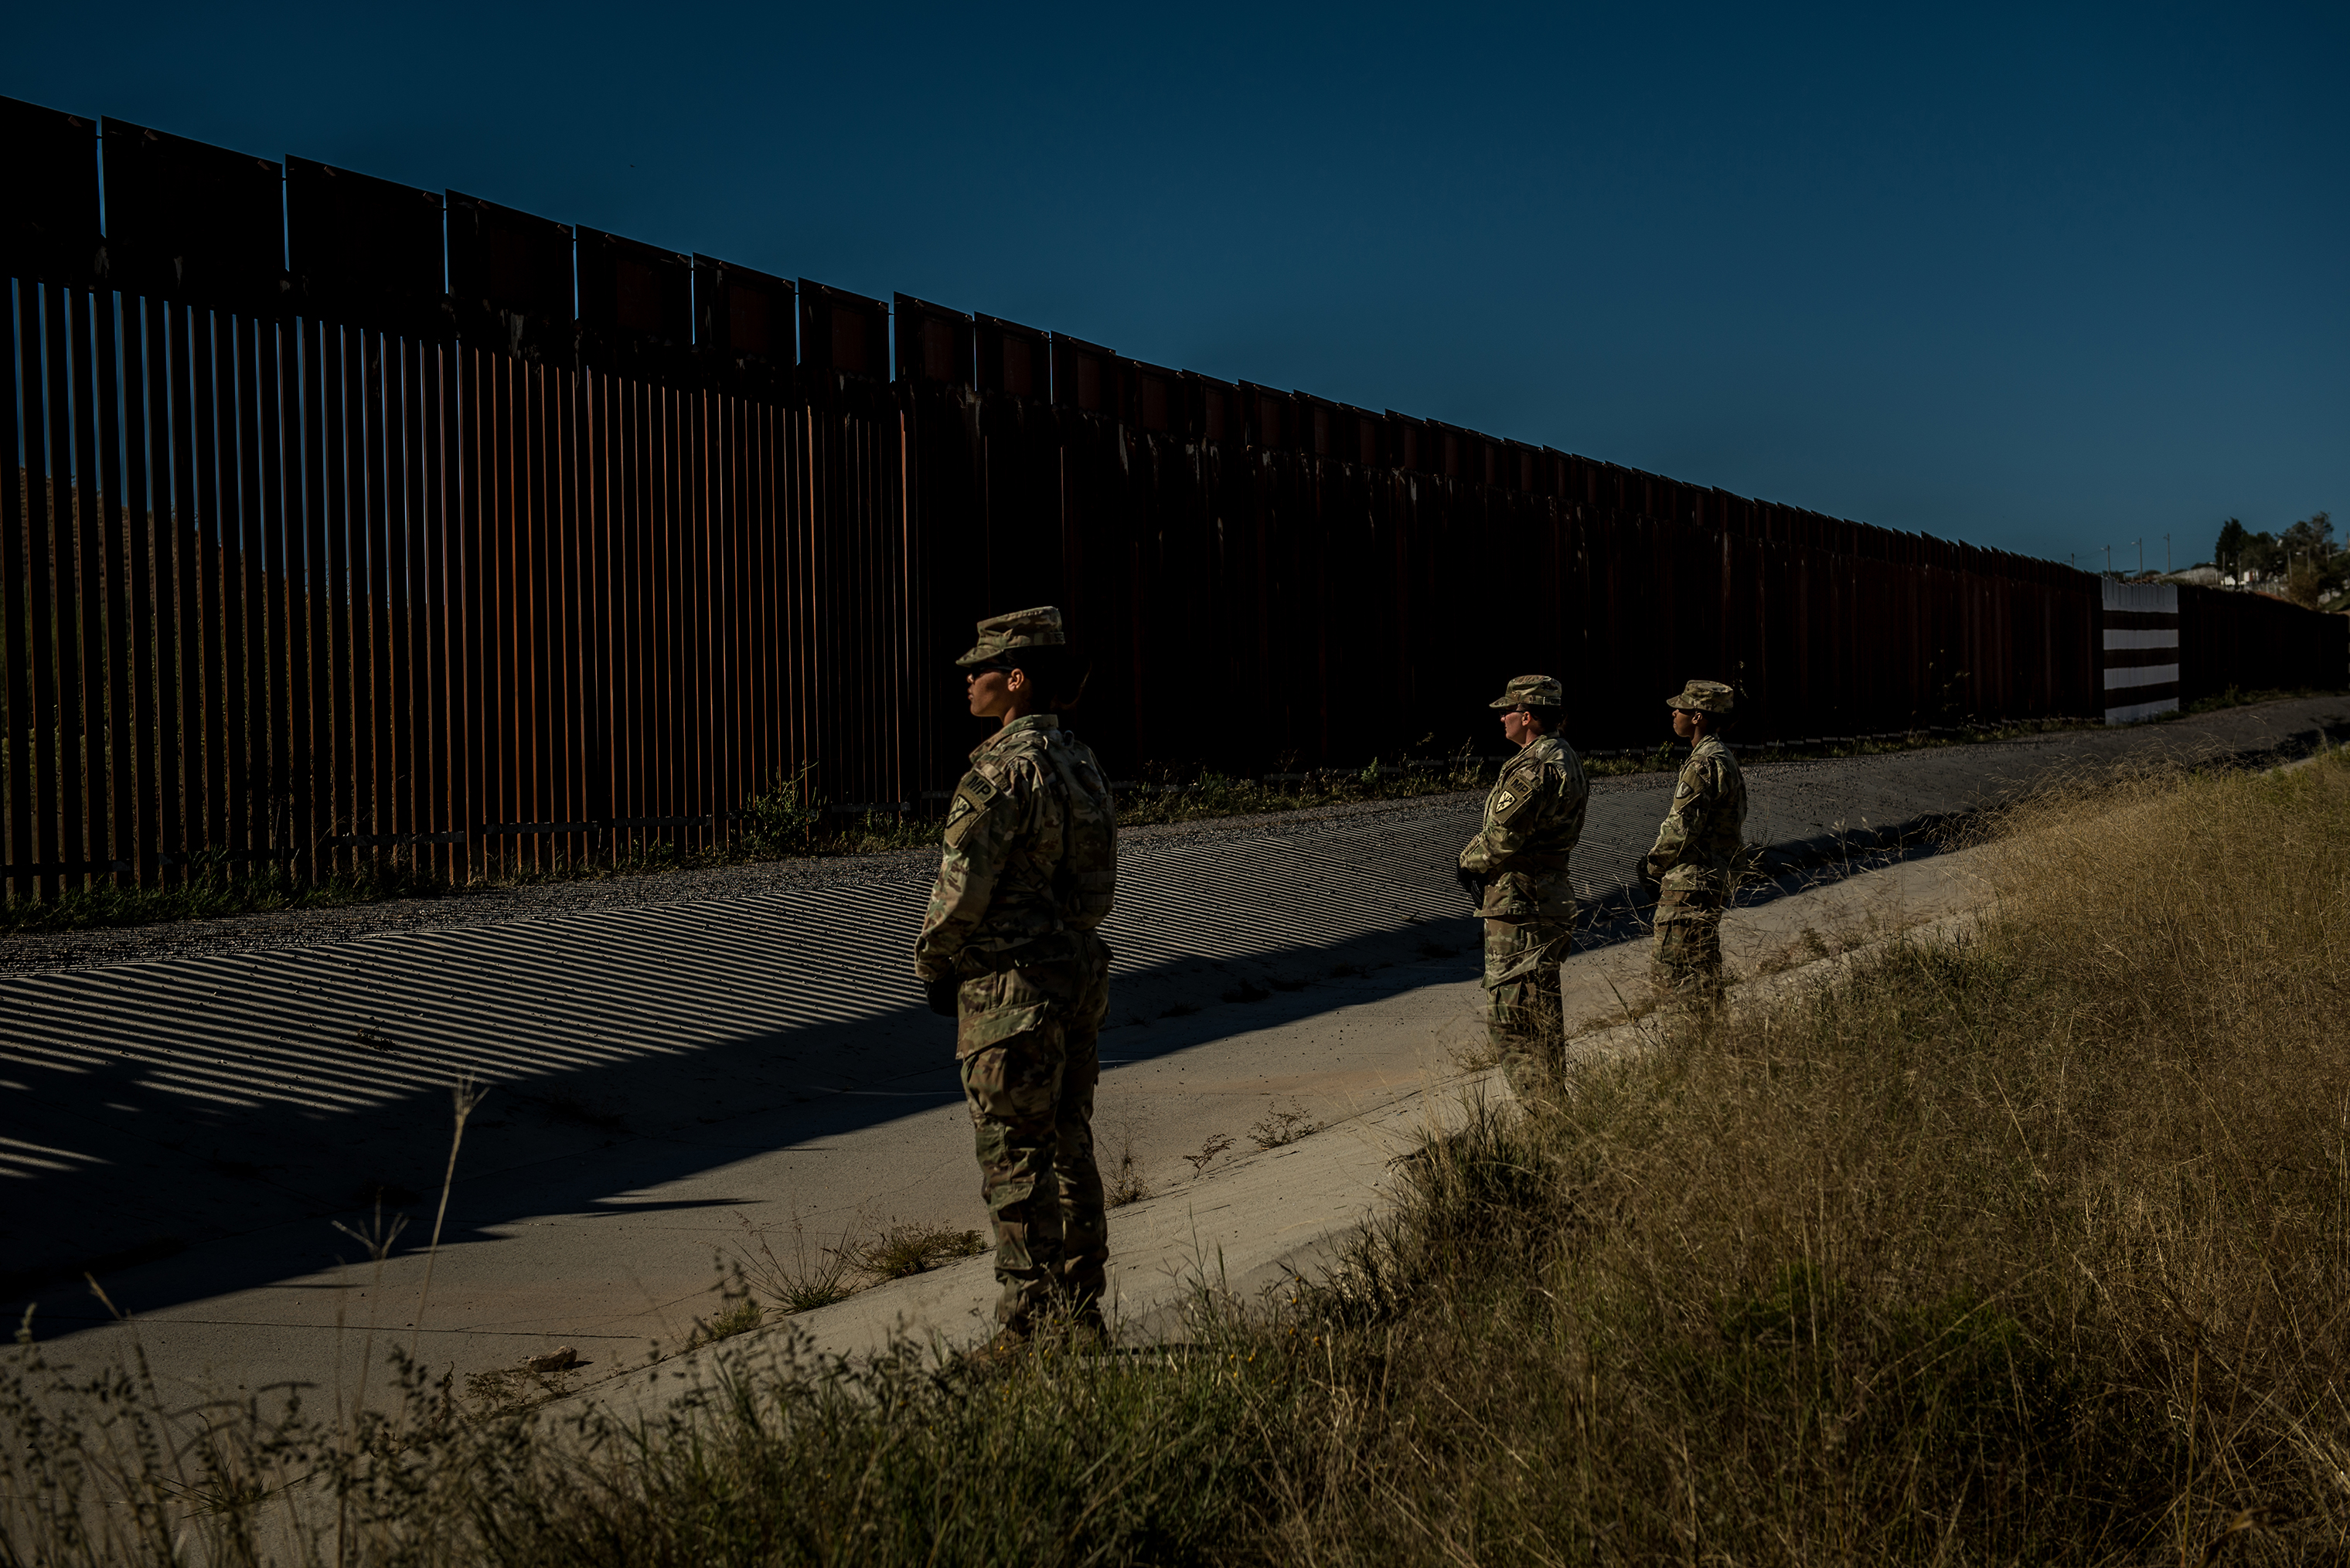 Military police stand guard as other members of the 104th Engineer Construction Company  work to heighten security of the border wall. (Meridith Kohut for TIME)